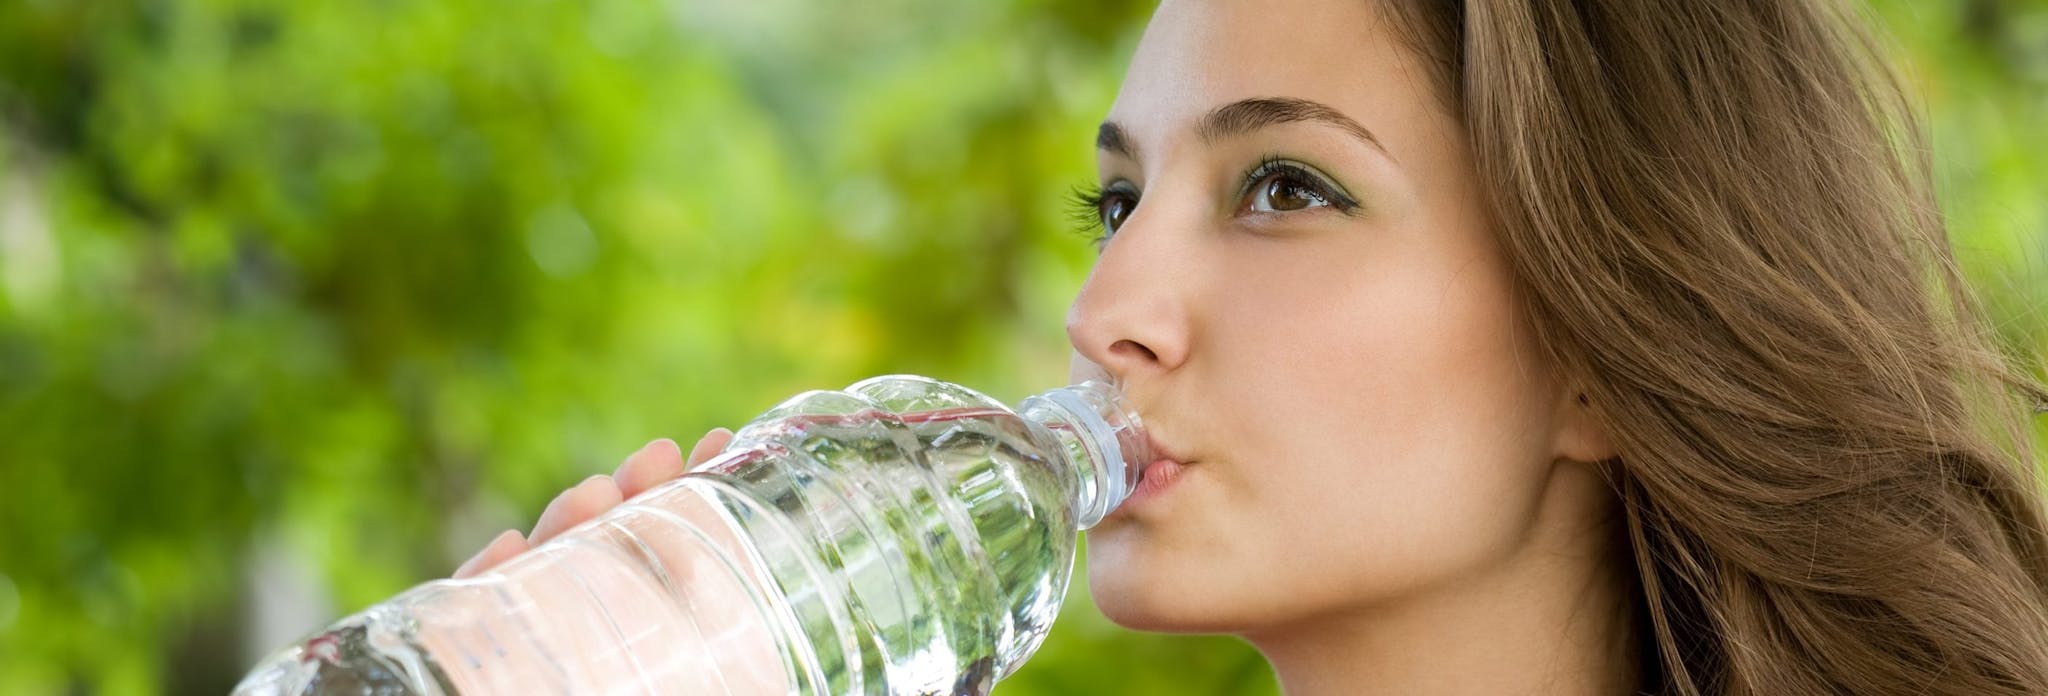 Drink More Water for Clear, Healthy Urine